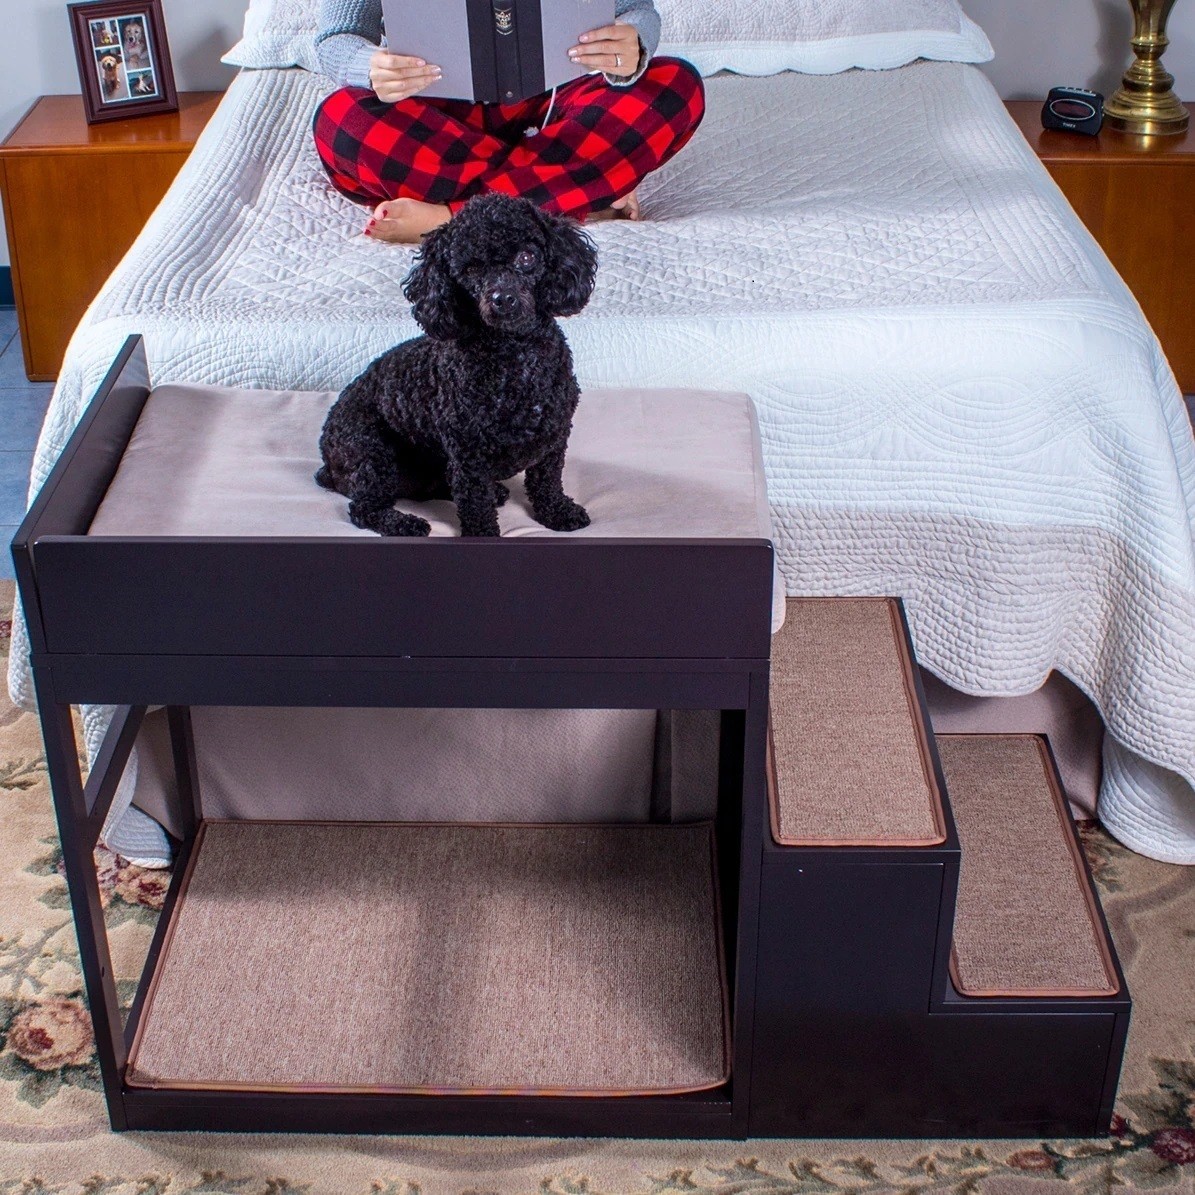 Multi level dog bed with stairs